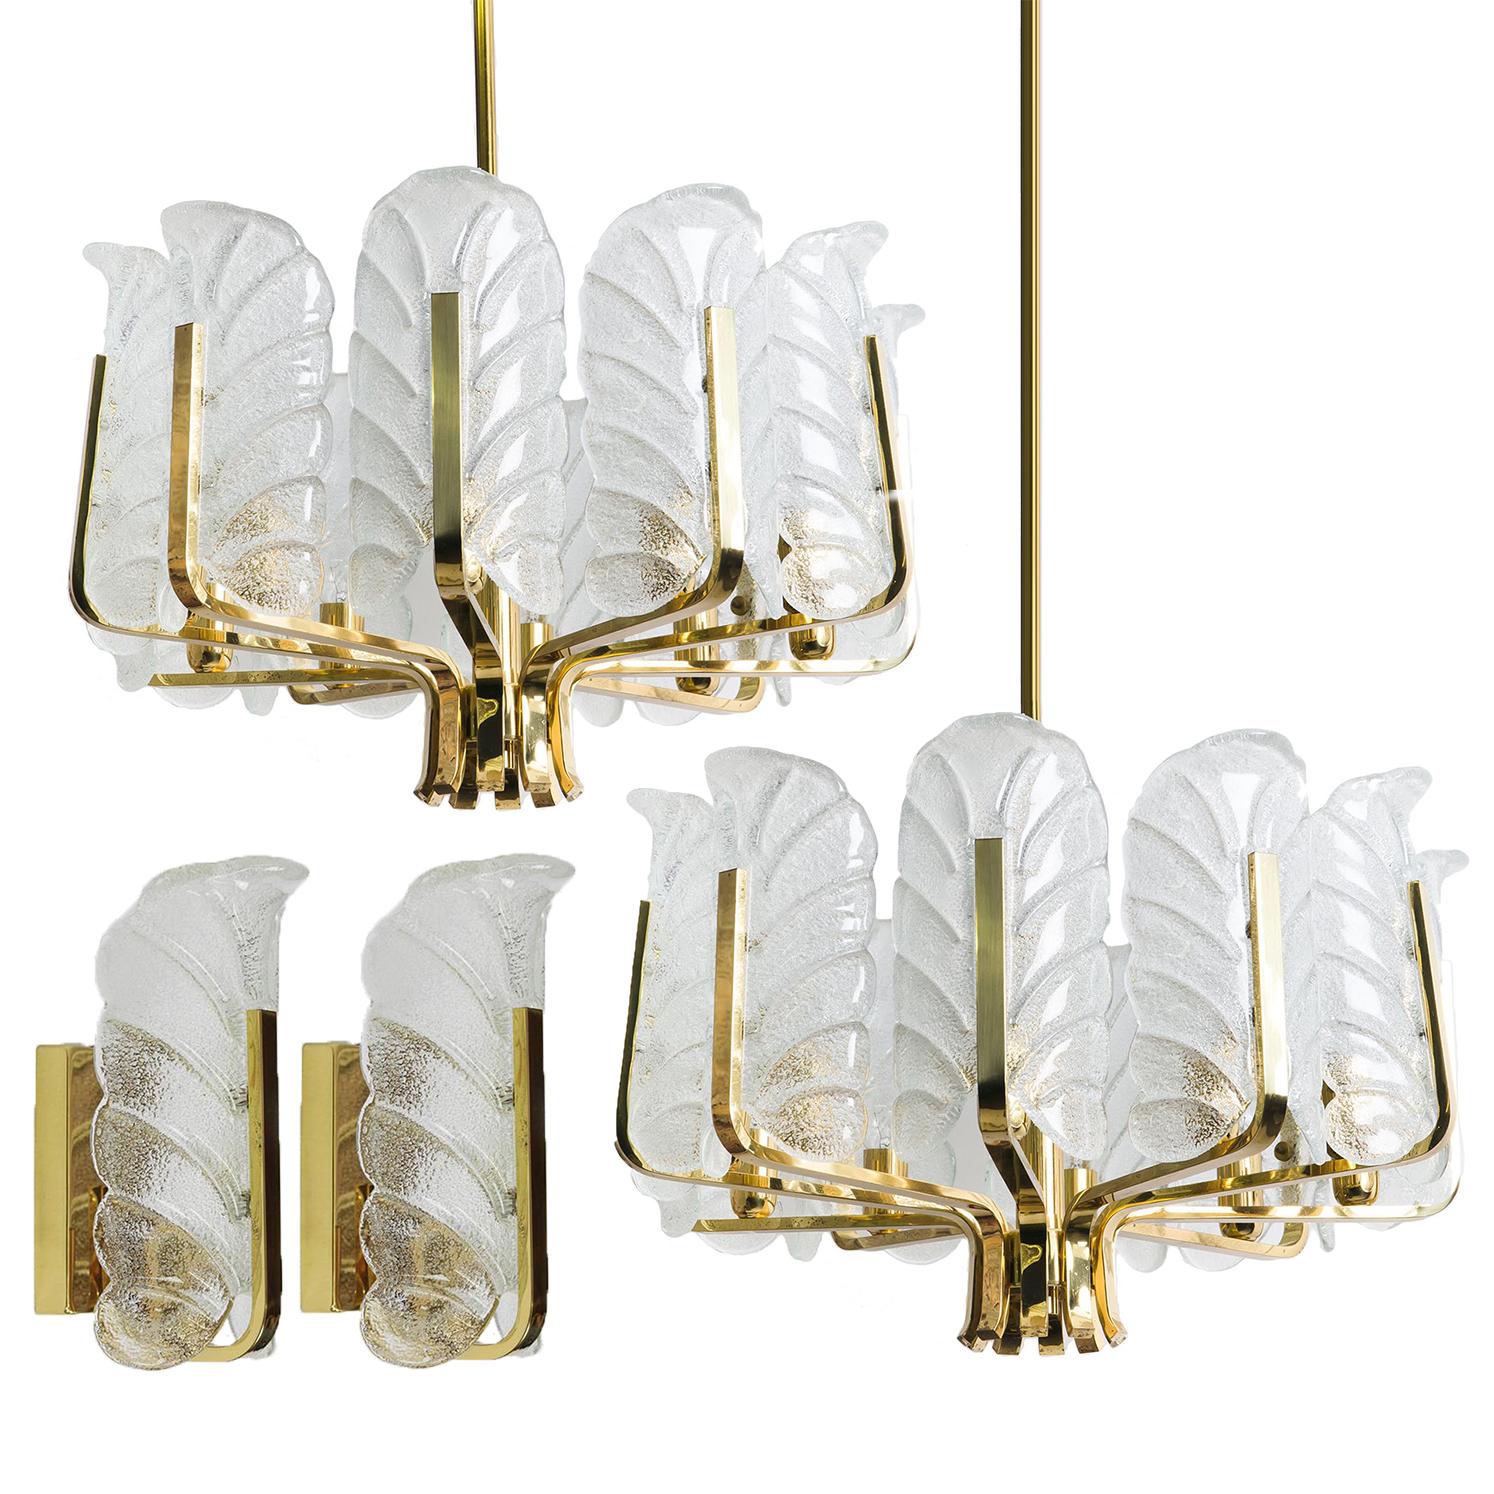 One of the Six Large Fagerlund Glass Leaves Brass Chandelier by Orrefors, 1960s In Good Condition For Sale In Rijssen, NL